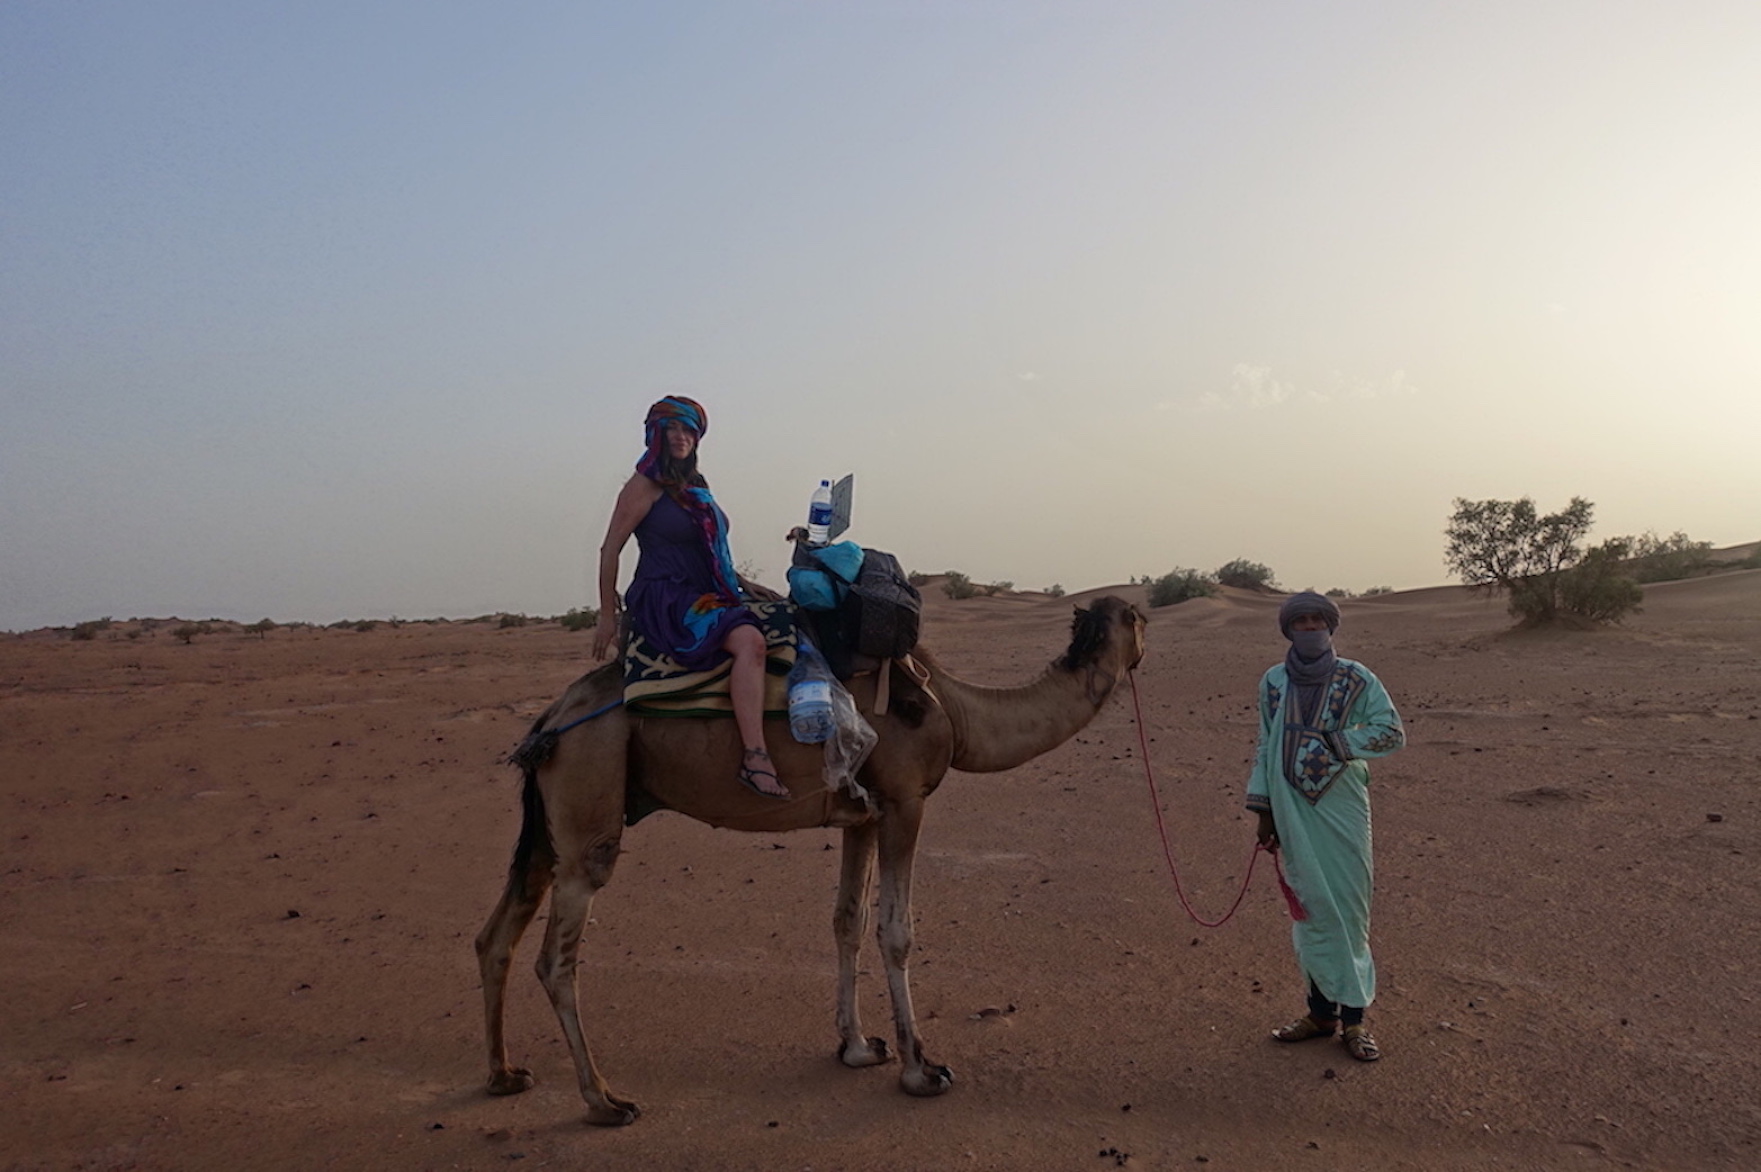 Pilar riding a camel and a guide on the front of the camel in the desert on the way to Erg Lihoudi